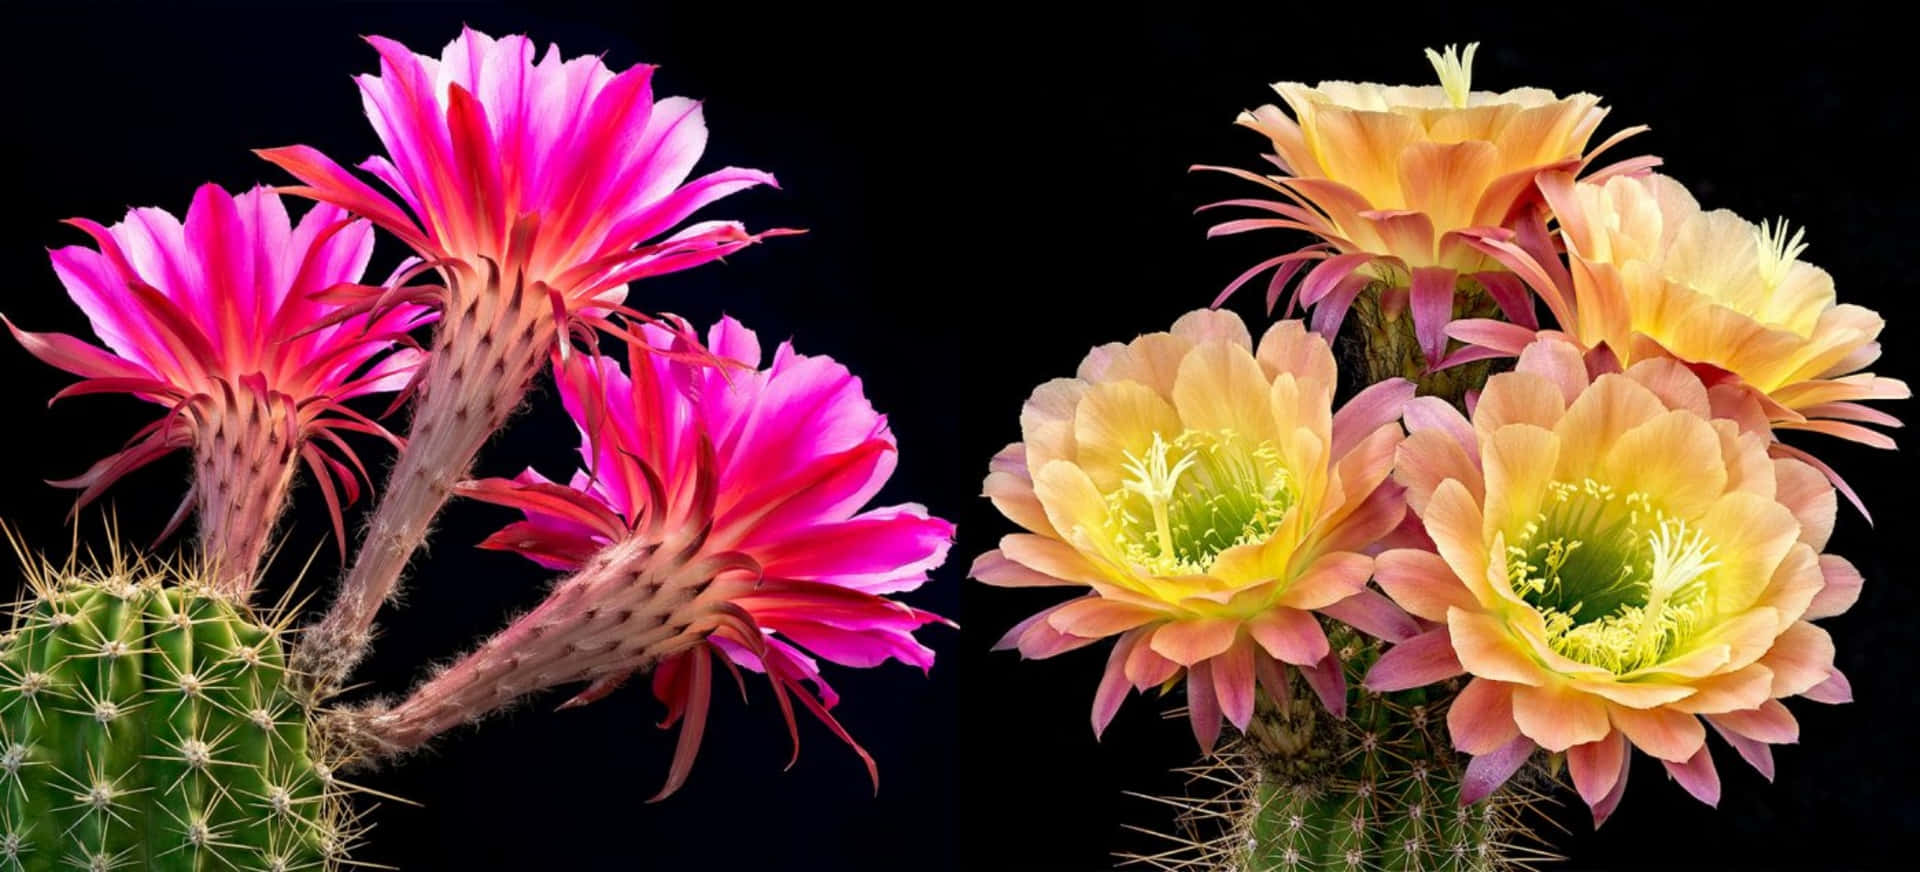 Two Cactus Plants With Different Colored Flowers